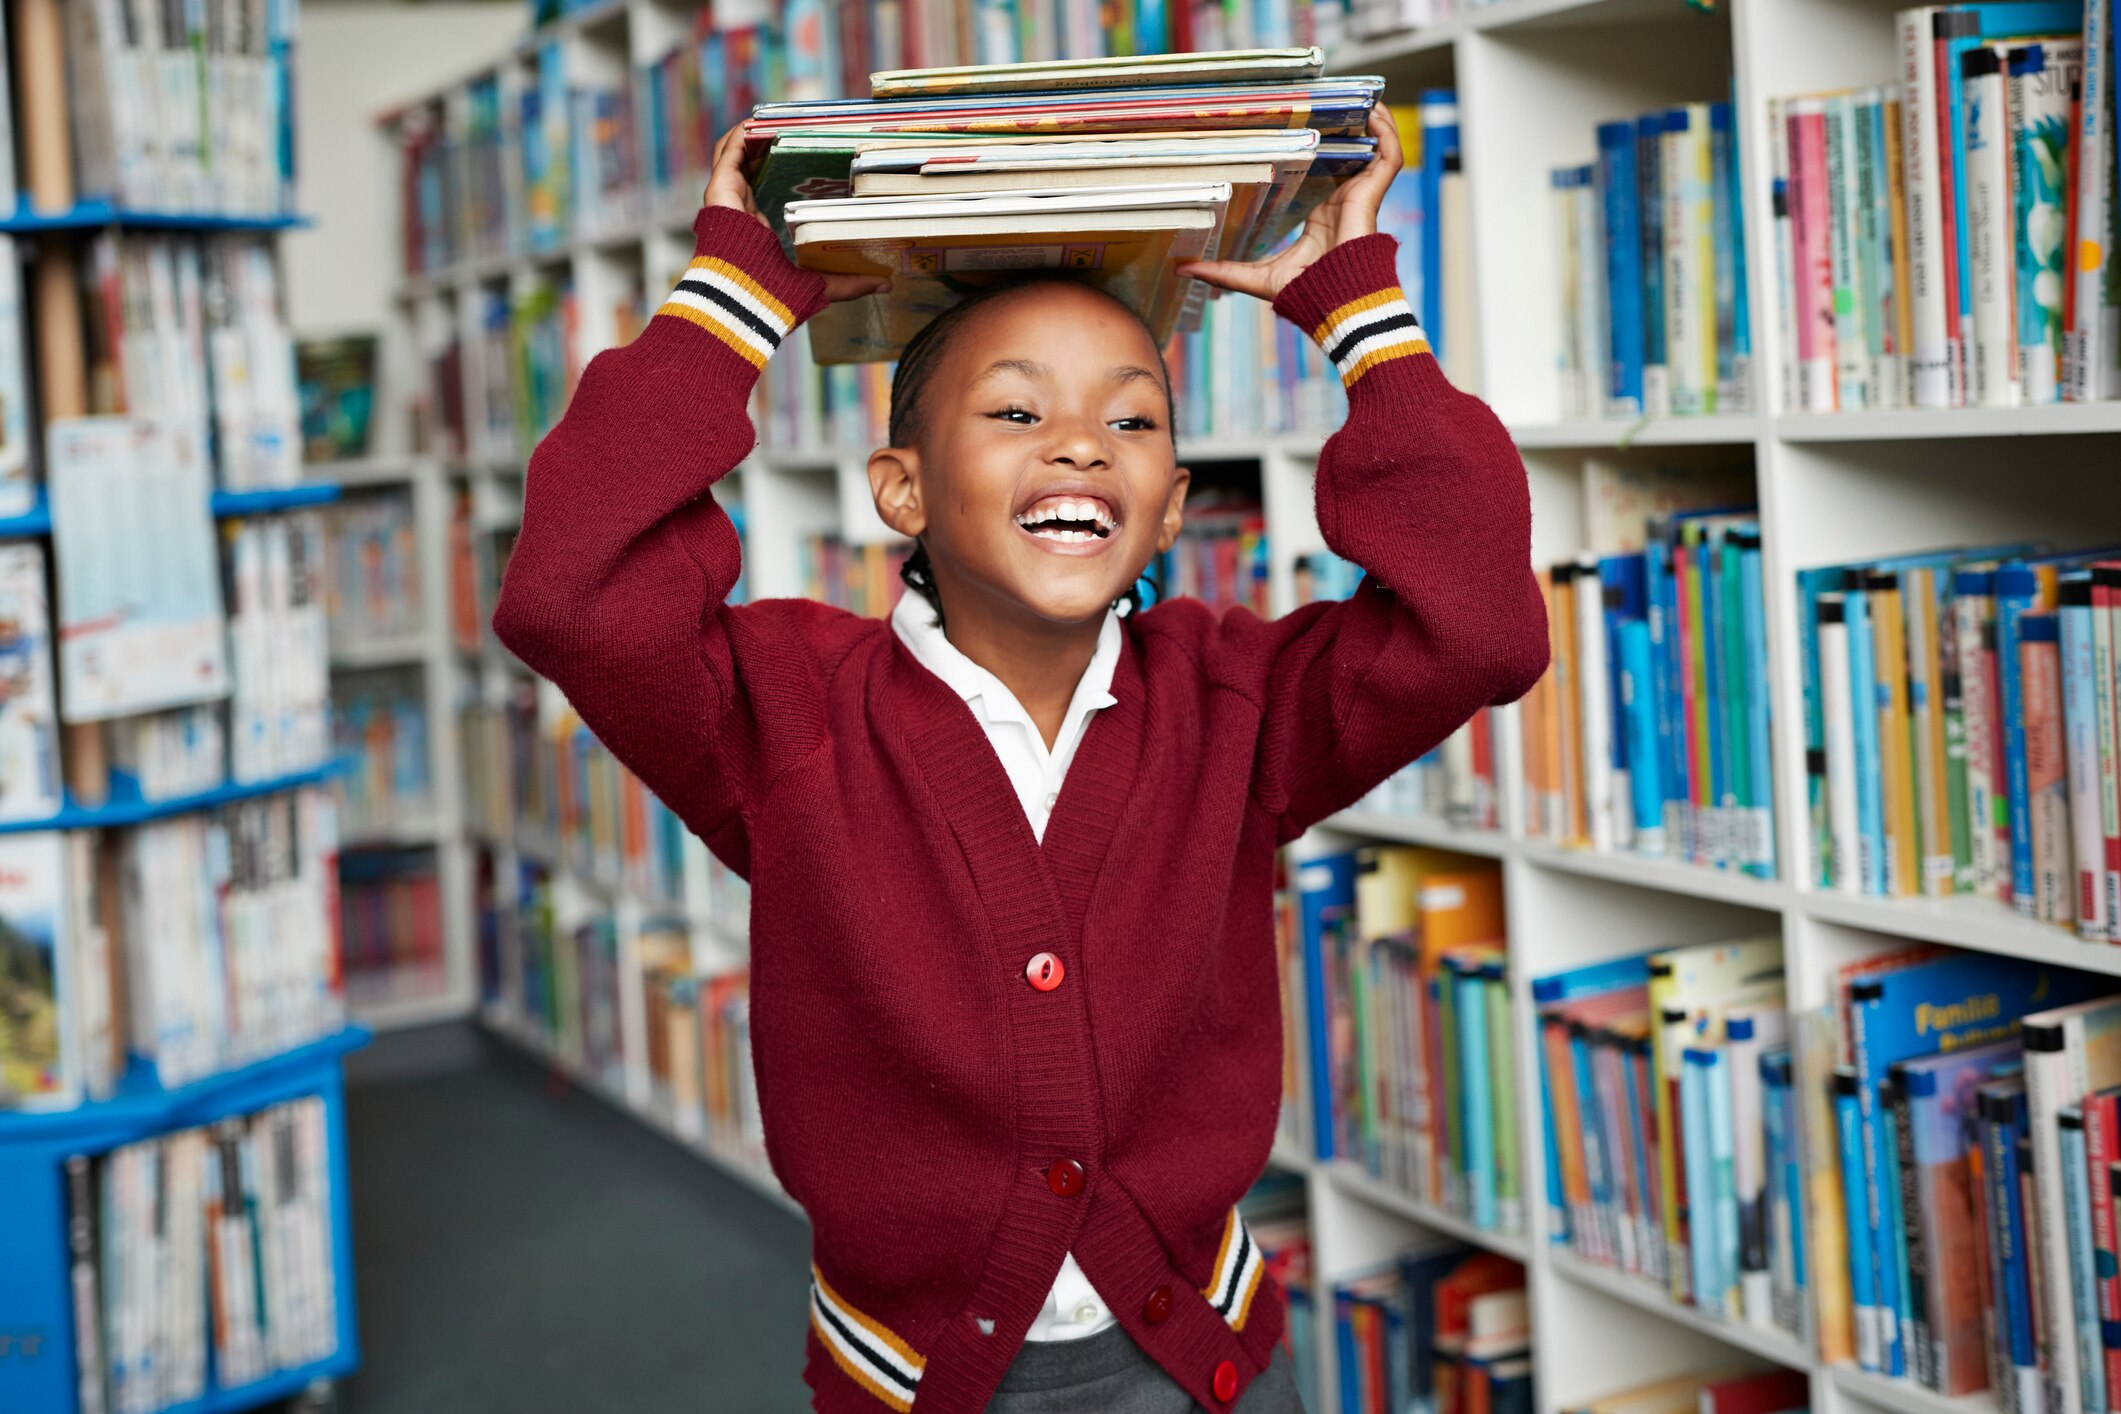 Cute schoolgirl smiling & balancing stack of books on the head at library